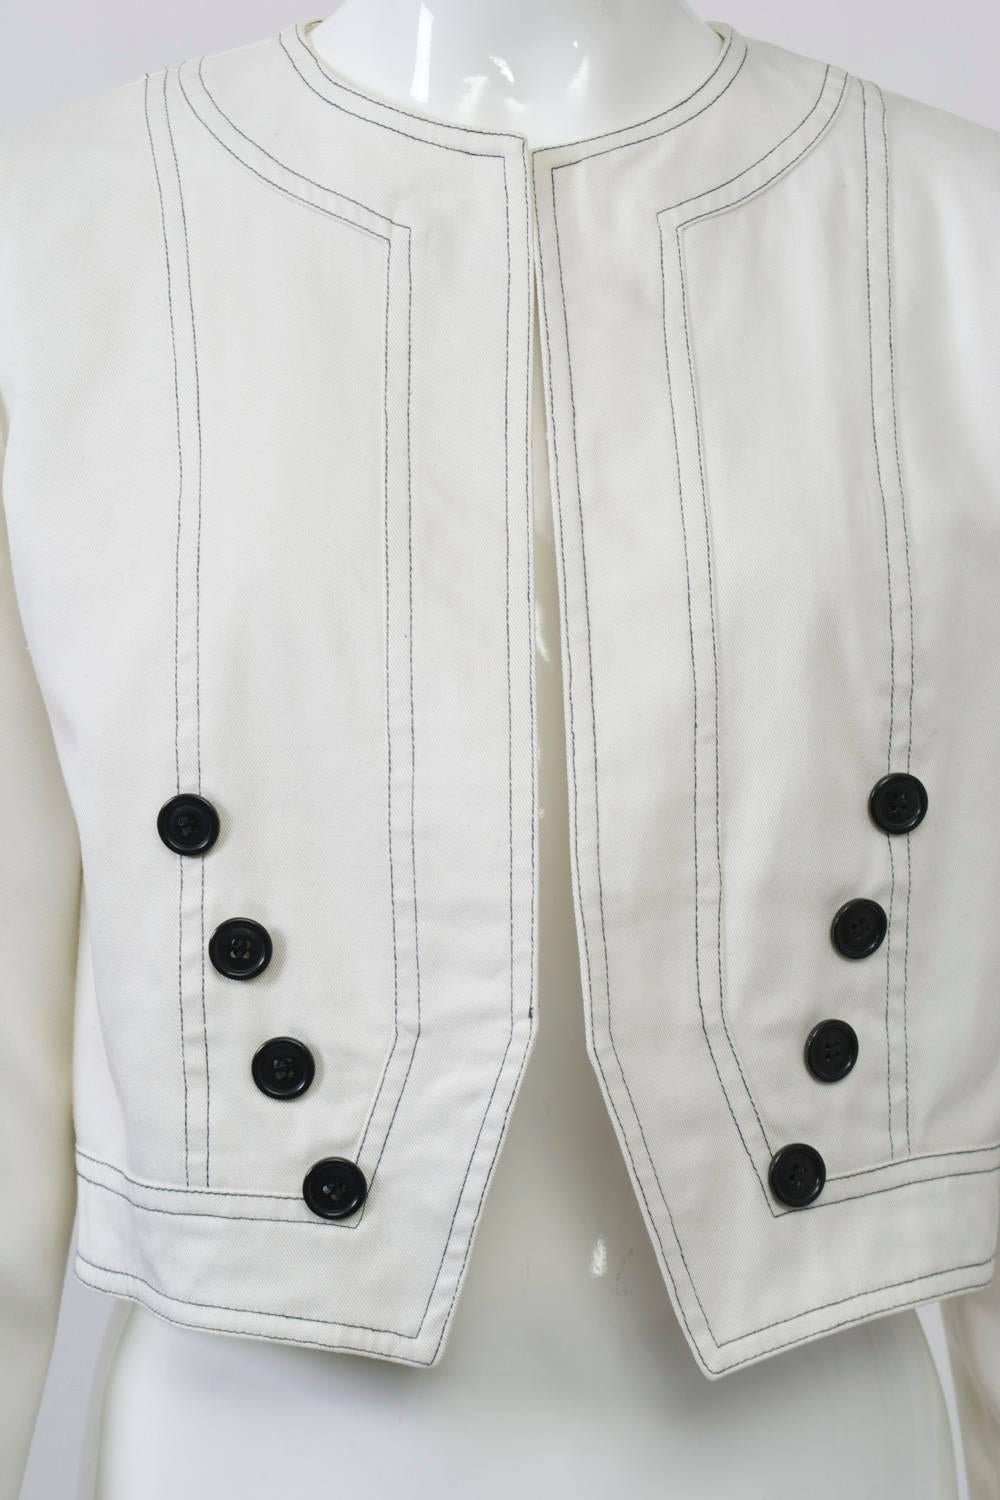 1980s white cotton cropped jacket by Oscar de la Renta features black topstitching at the edges and diagonally placed decorative black buttons from the bottom front corners towards the armhole. The slightly cut-in front edge is a nice detail. Padded